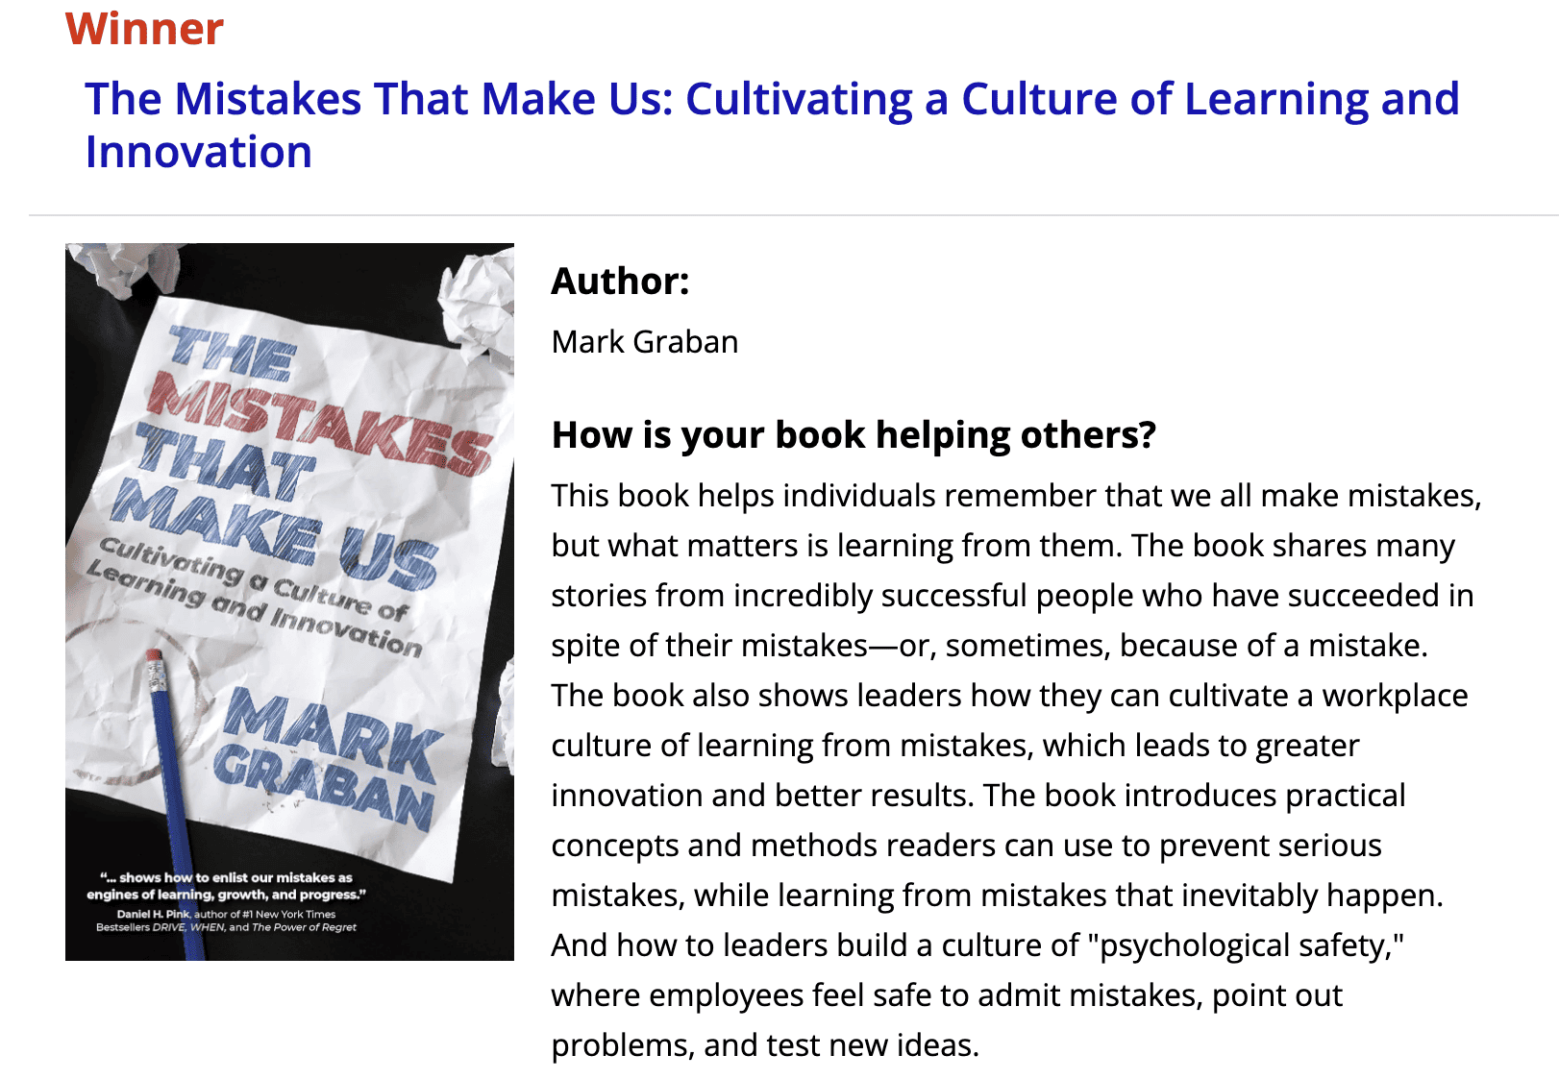 How is your book helping others?
This book helps individuals remember that we all make mistakes, but what matters is learning from them. The book shares many stories from incredibly successful people who have succeeded in spite of their mistakes--or, sometimes, because of a mistake. The book also shows leaders how they can cultivate a workplace culture of learning from mistakes, which leads to greater innovation and better results. The book introduces practical concepts and methods readers can use to prevent serious mistakes, while learning from mistakes that inevitably happen. And how to leaders build a culture of "psychological safety," where employees feel safe to admit mistakes, point out problems, and test new ideas.